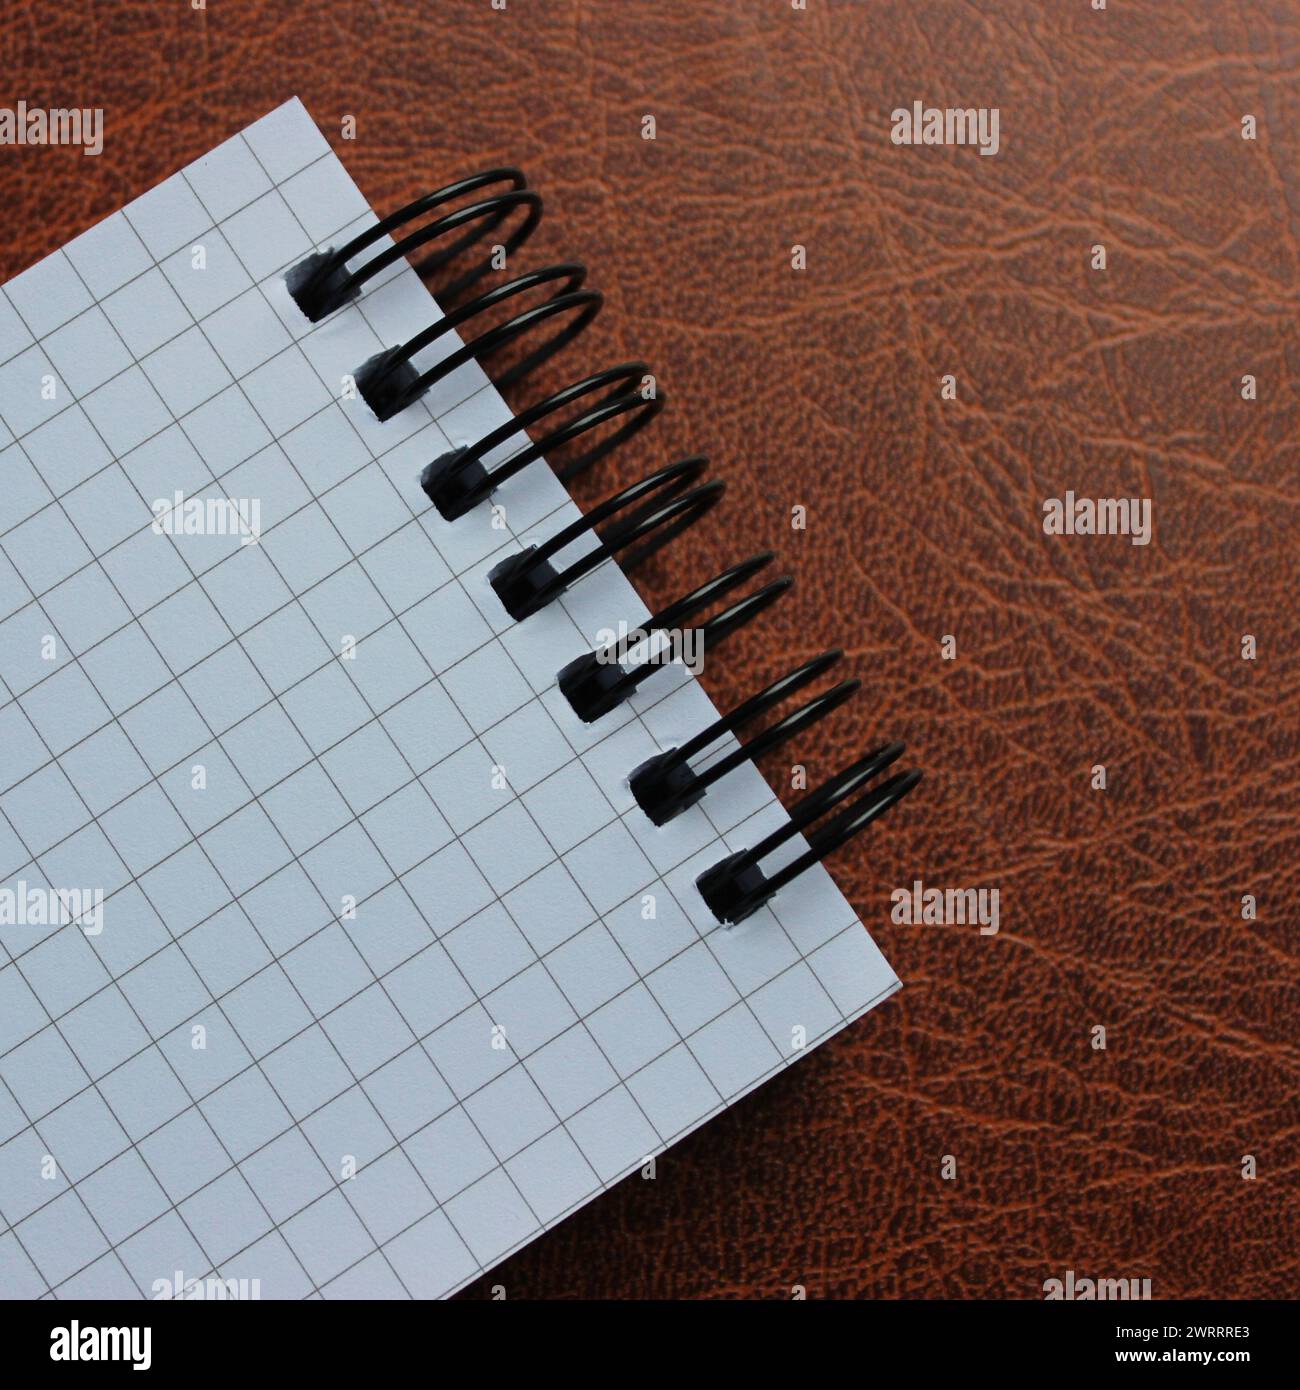 Square Image Of Bound Notepad With White Page On Leather Surface Stock Photo